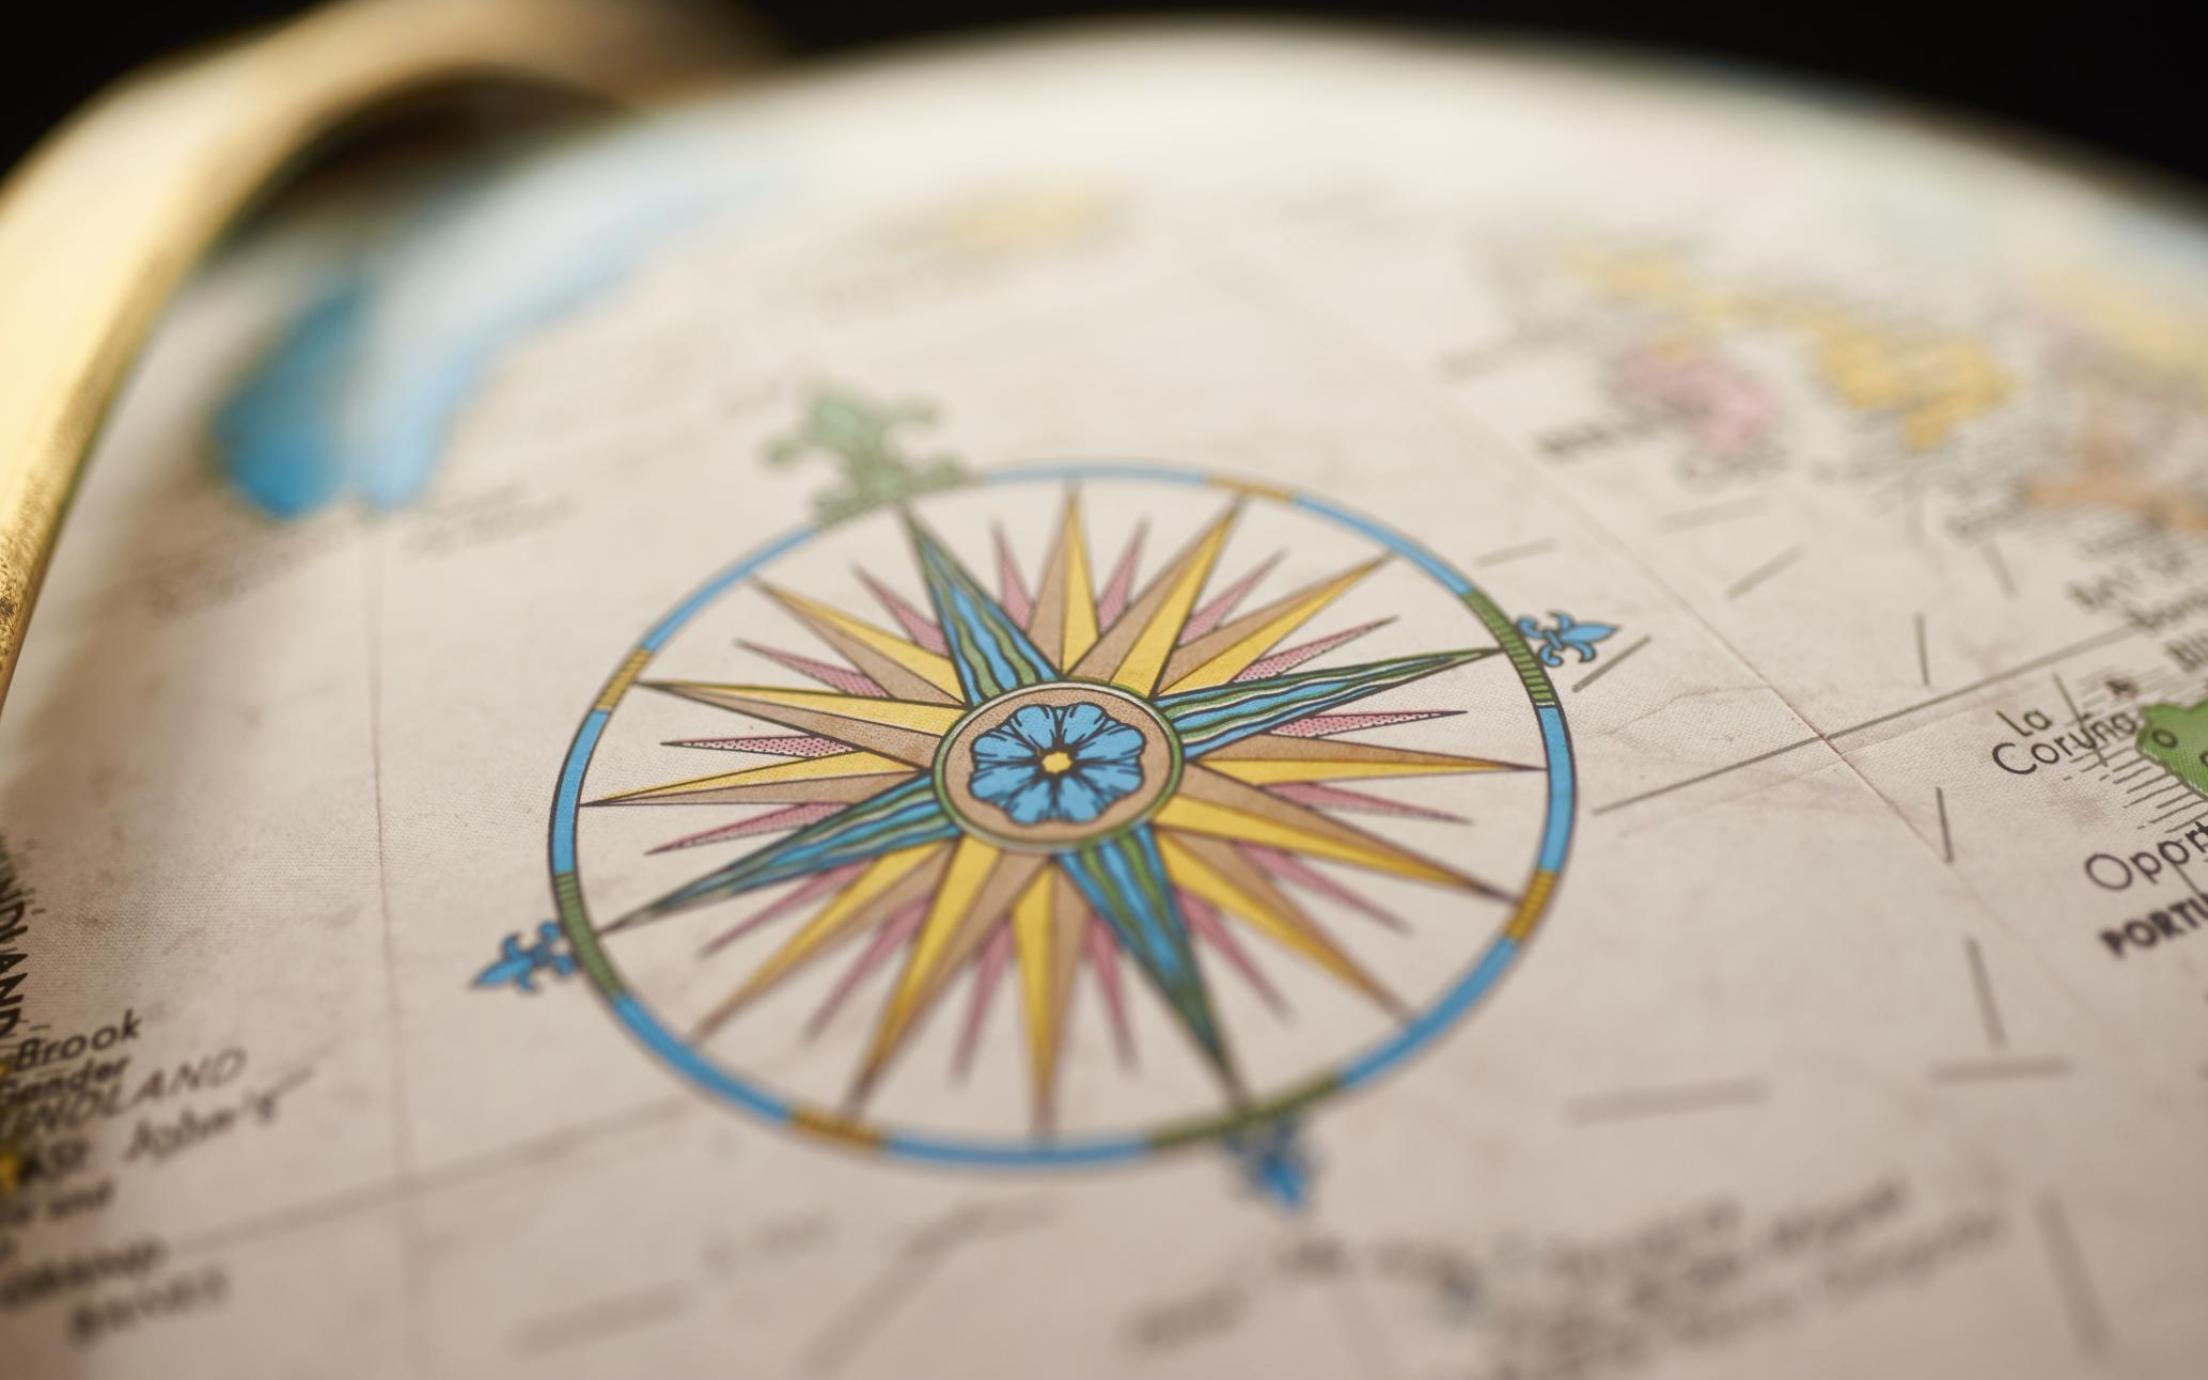 Picture of a compass rose on a globe